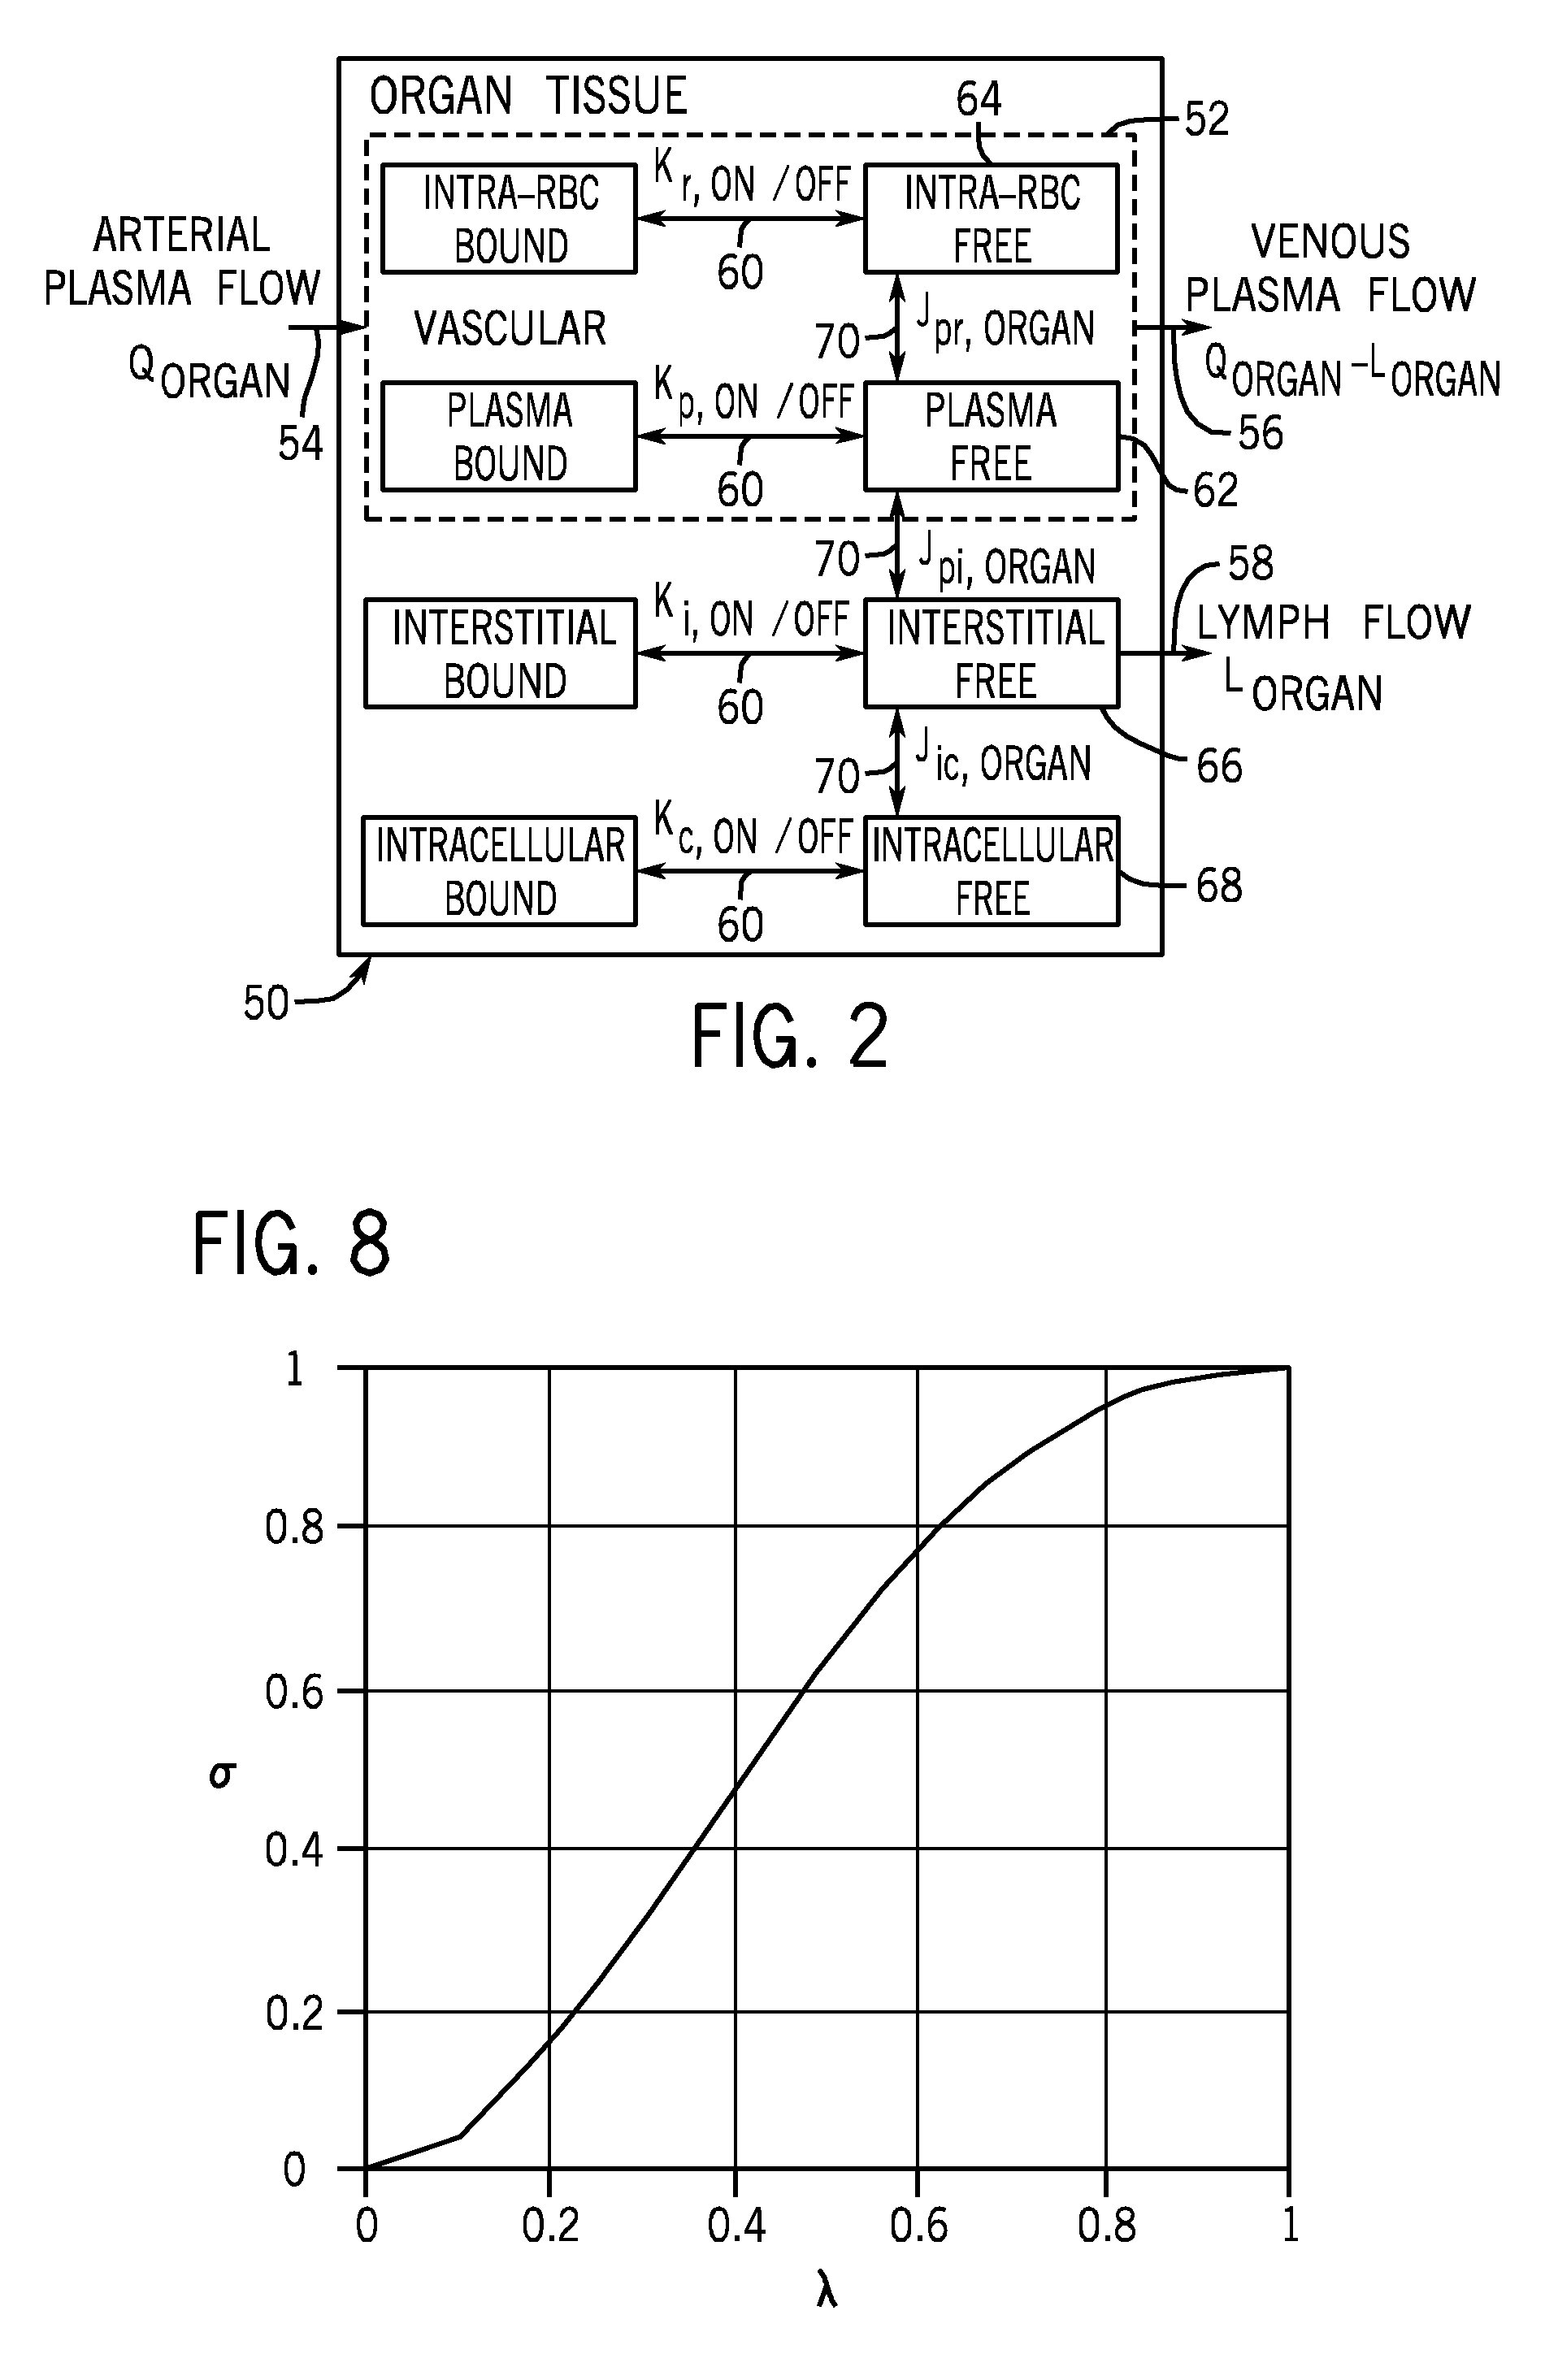 Method and apparatus for assessing feasibility of probes and biomarkers